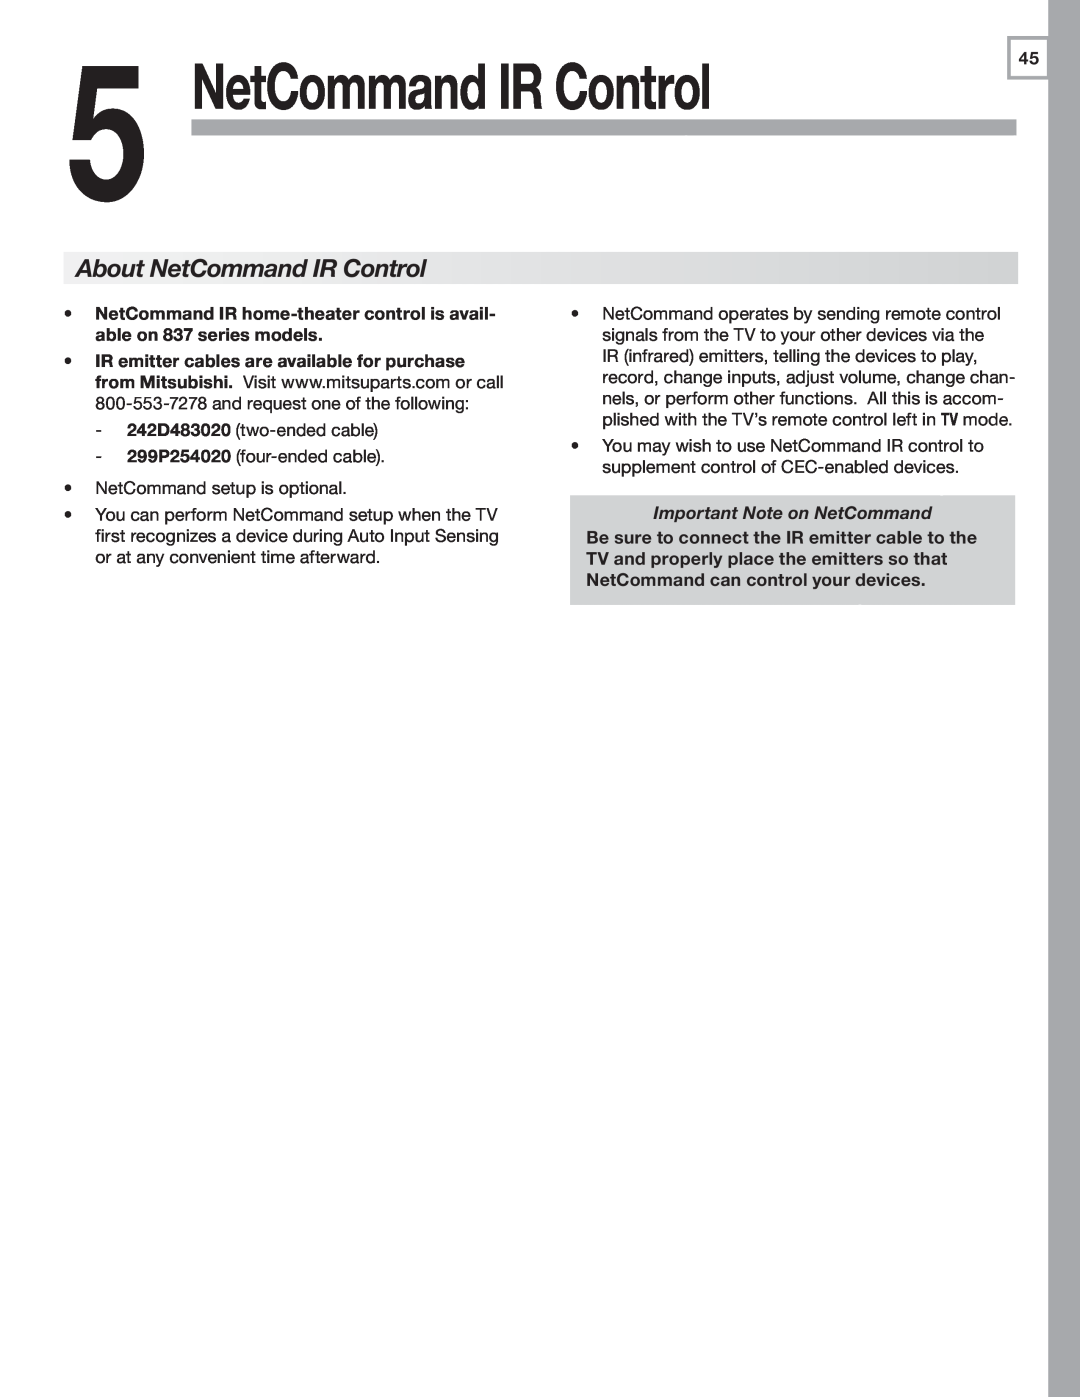 Mitsubishi Electronics 837, 737, C9 manual About NetCommand IR Control, Important Note on NetCommand 